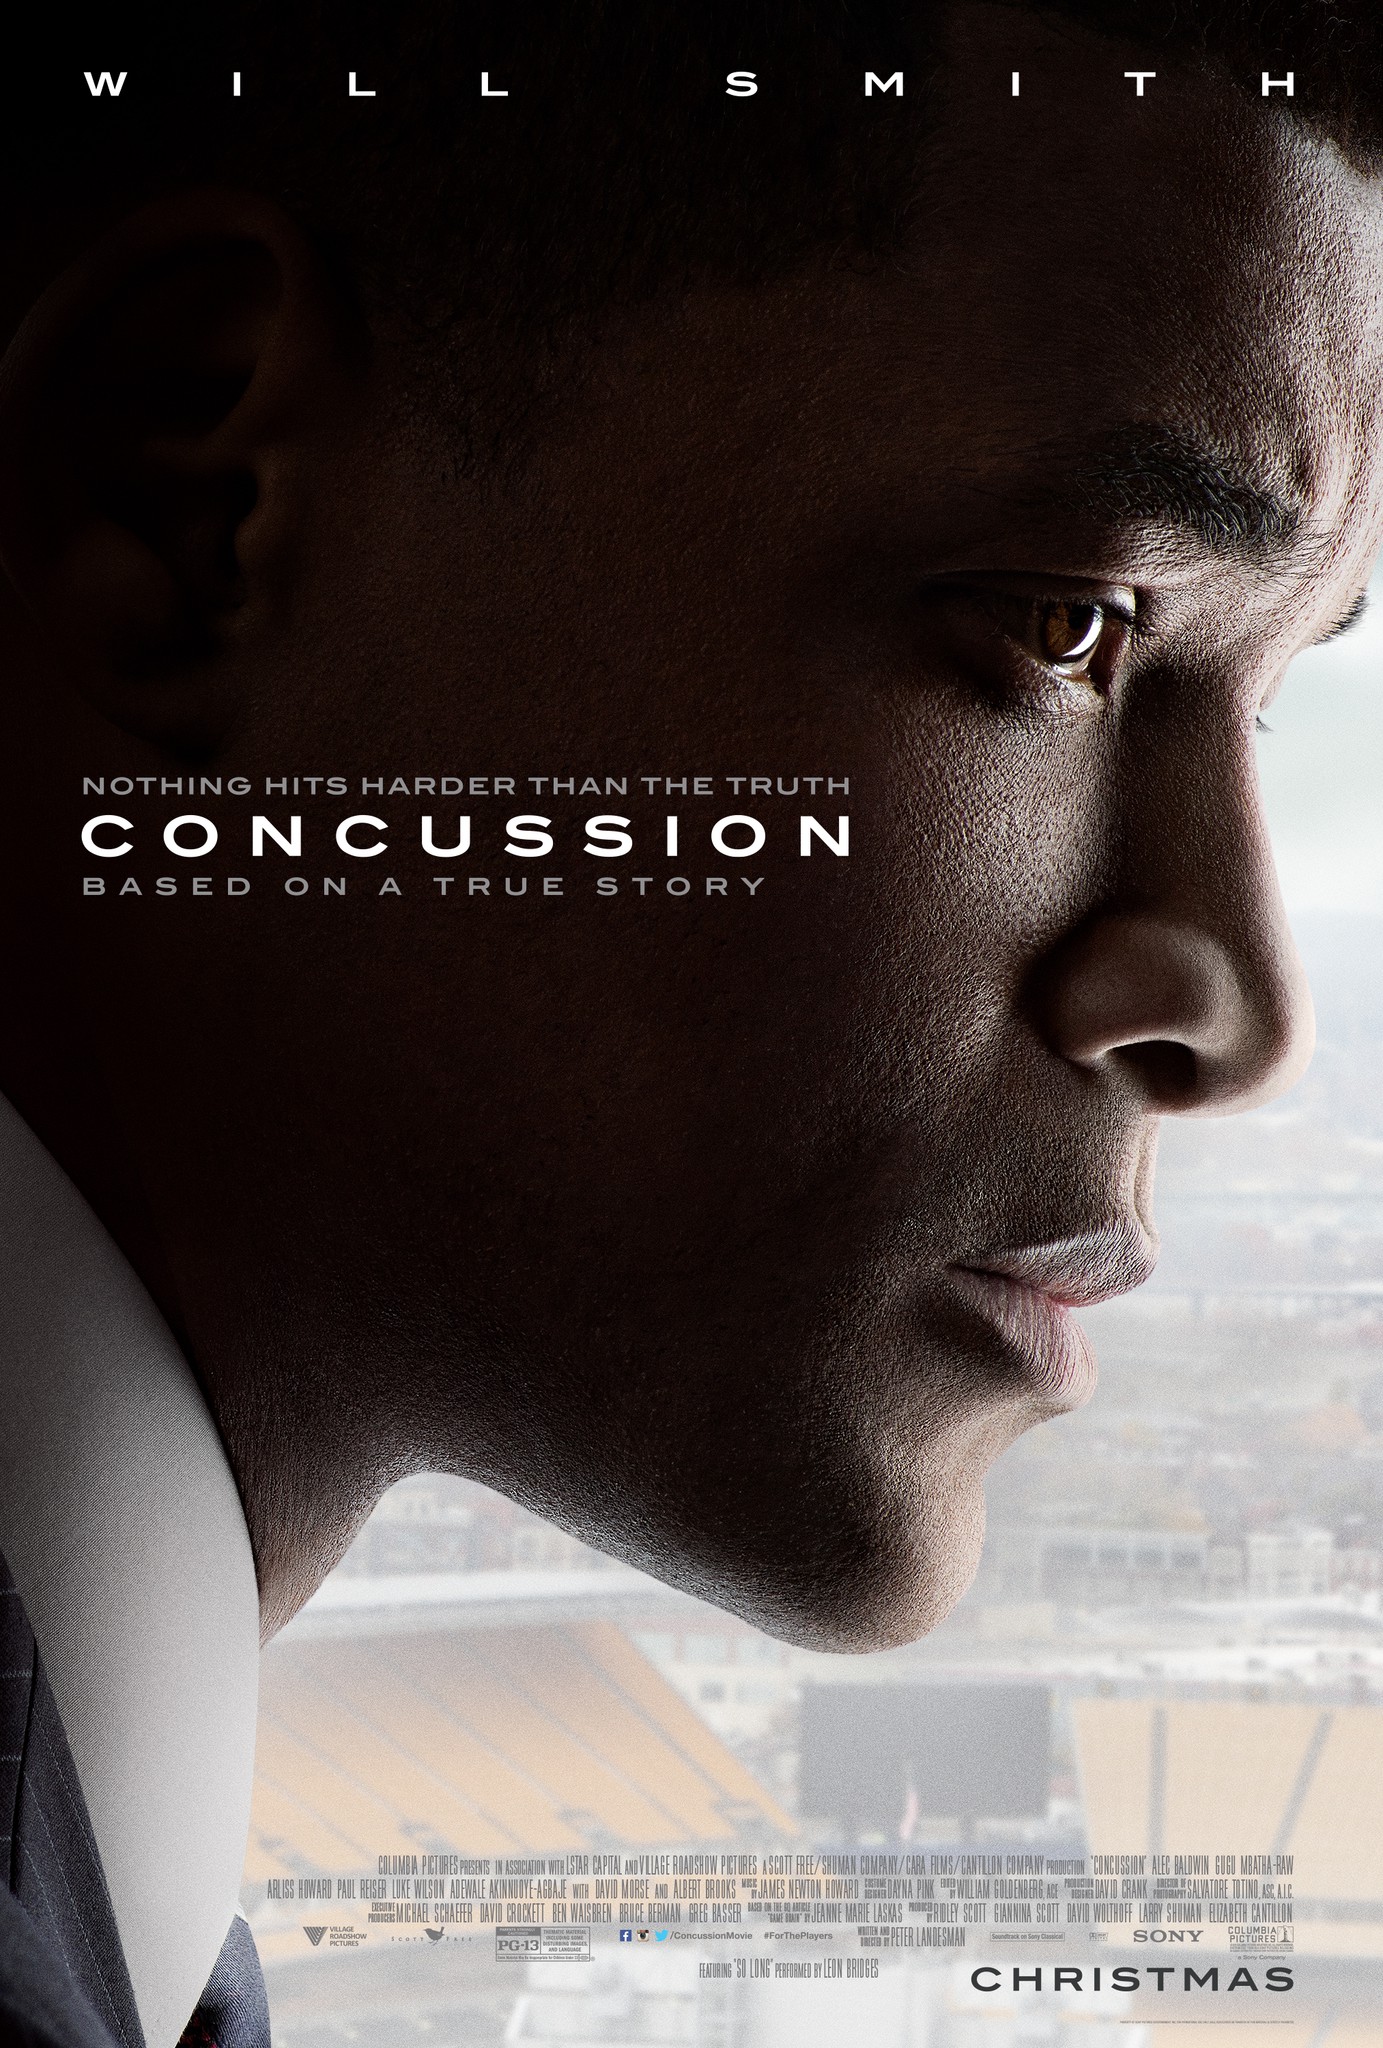 New Poster And Trailer For Will Smith's Football Drama 'Concussion